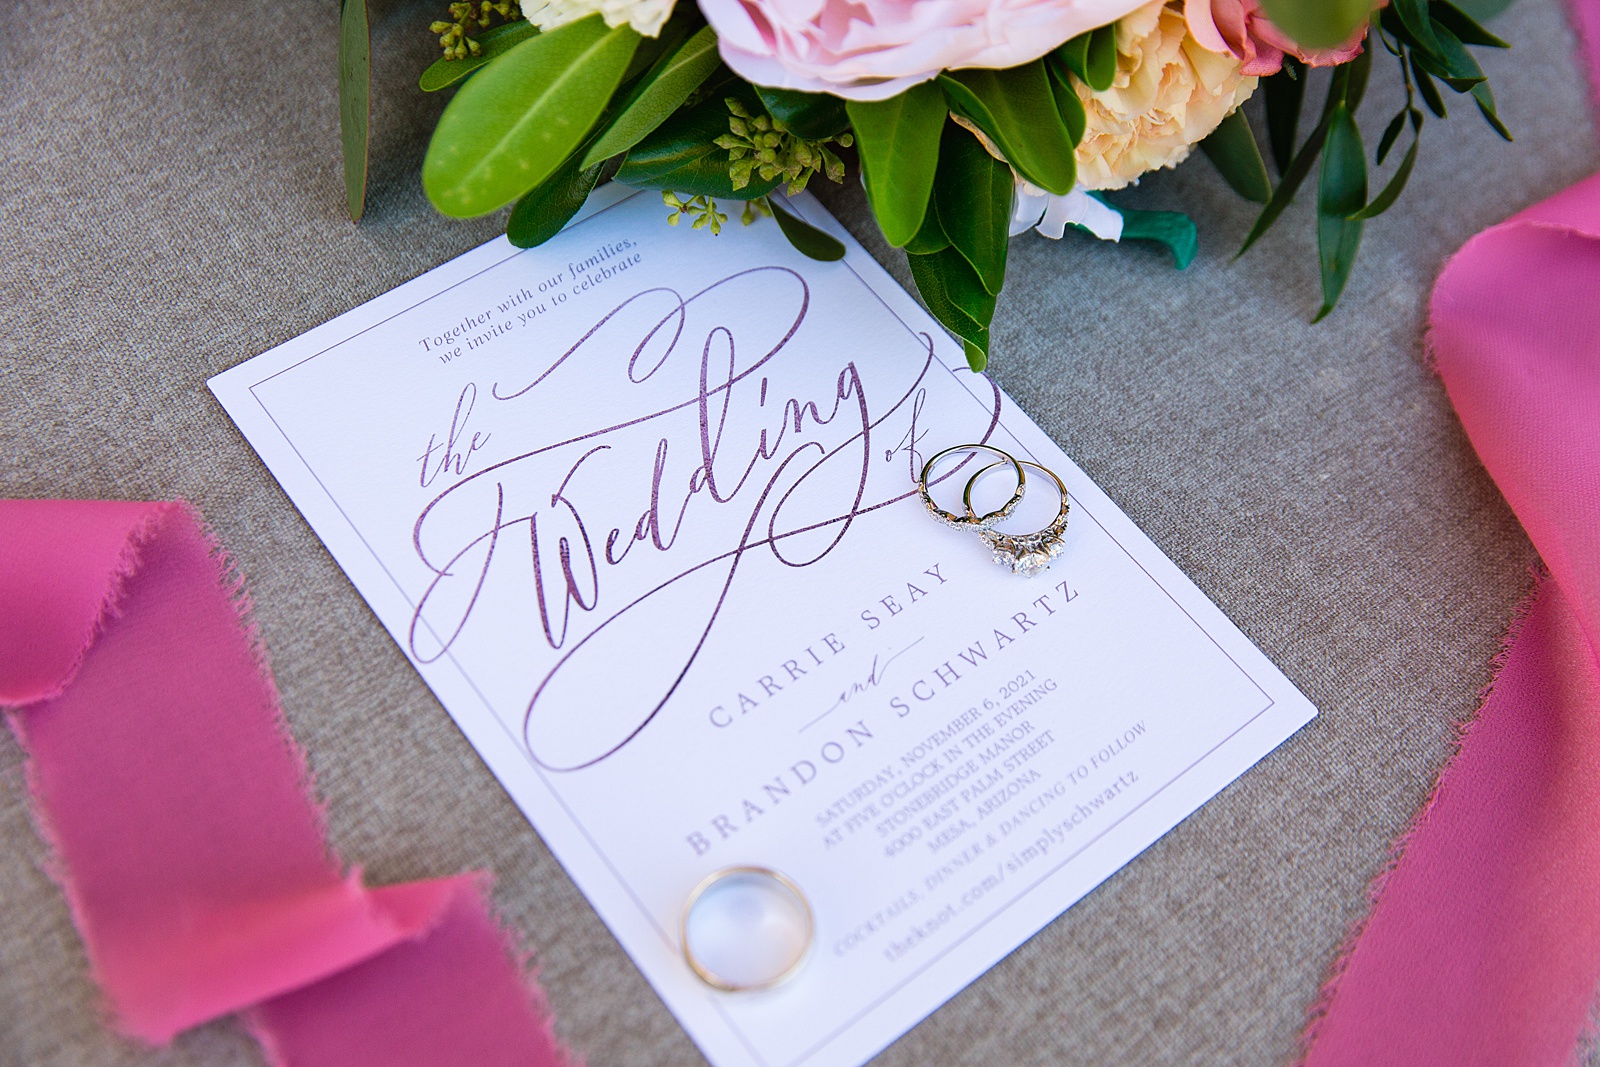 Romantic inspired pink and white wedding invitations with wedding rings by Arizona wedding photographer PMA Photography.